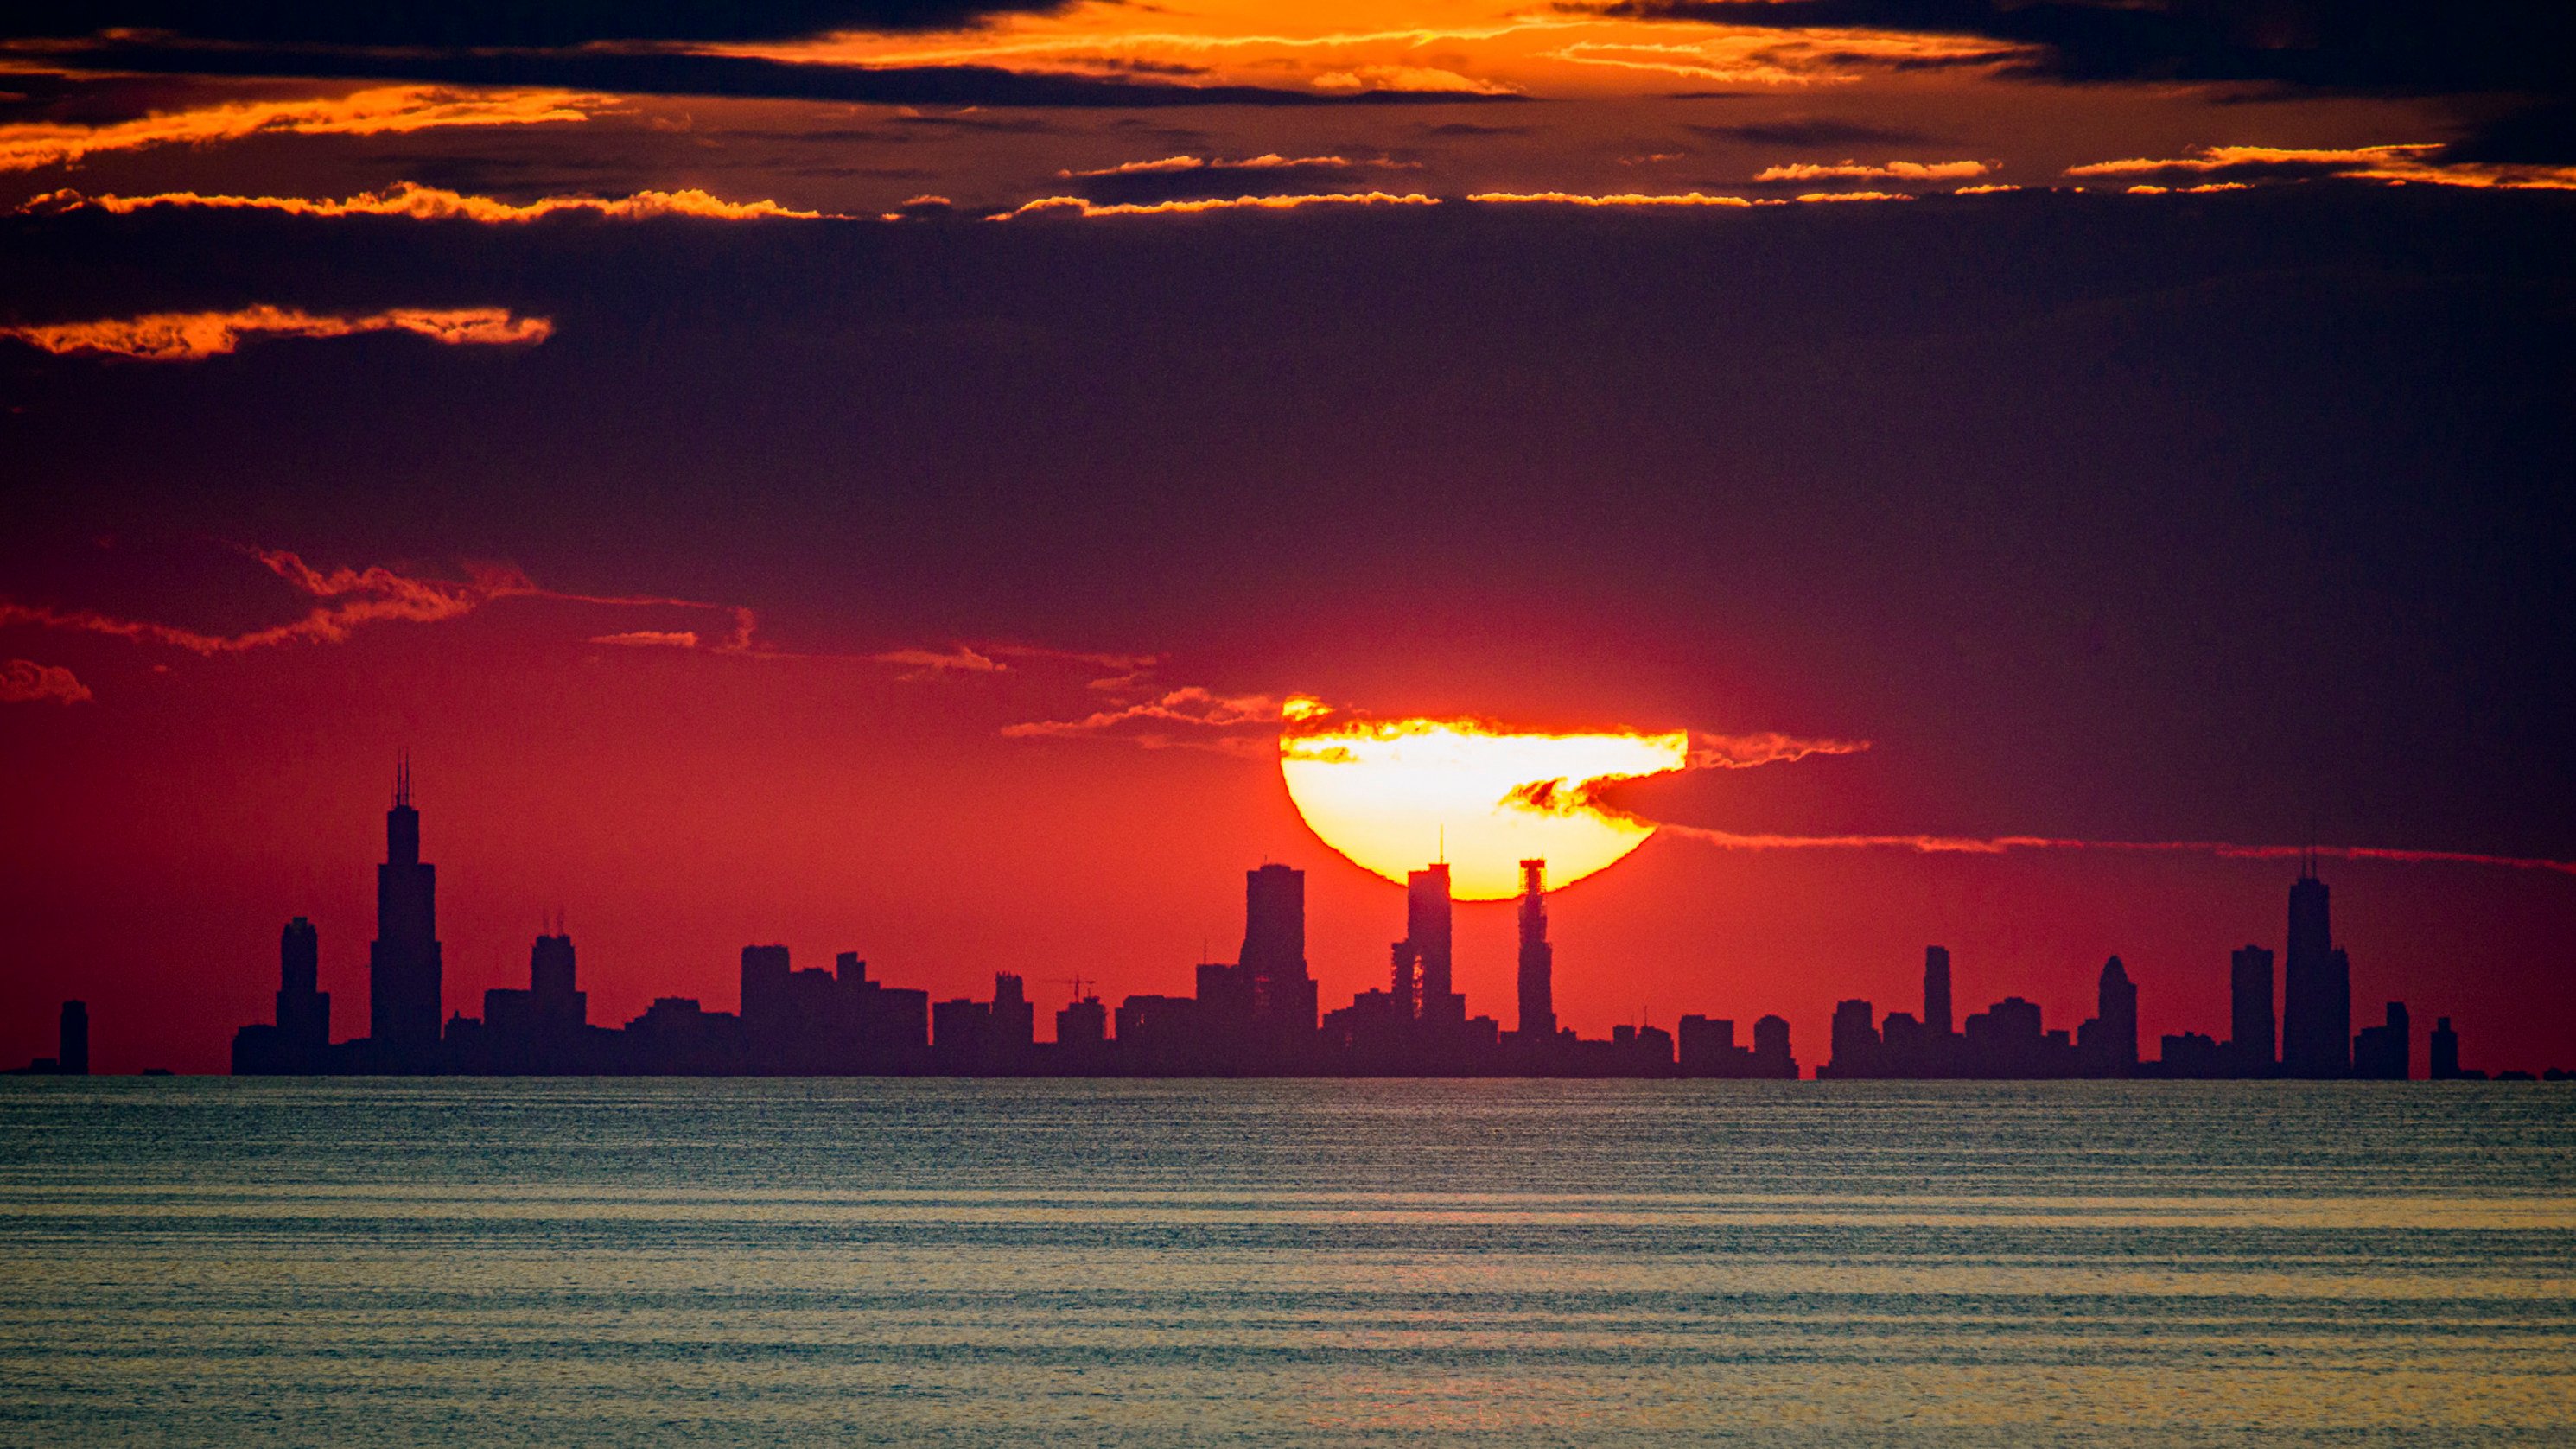 Sunset over Chicago, seen from Indiana Dunes. Photo: Indiana Dunes National Park Ranger Rafi Wilkinson